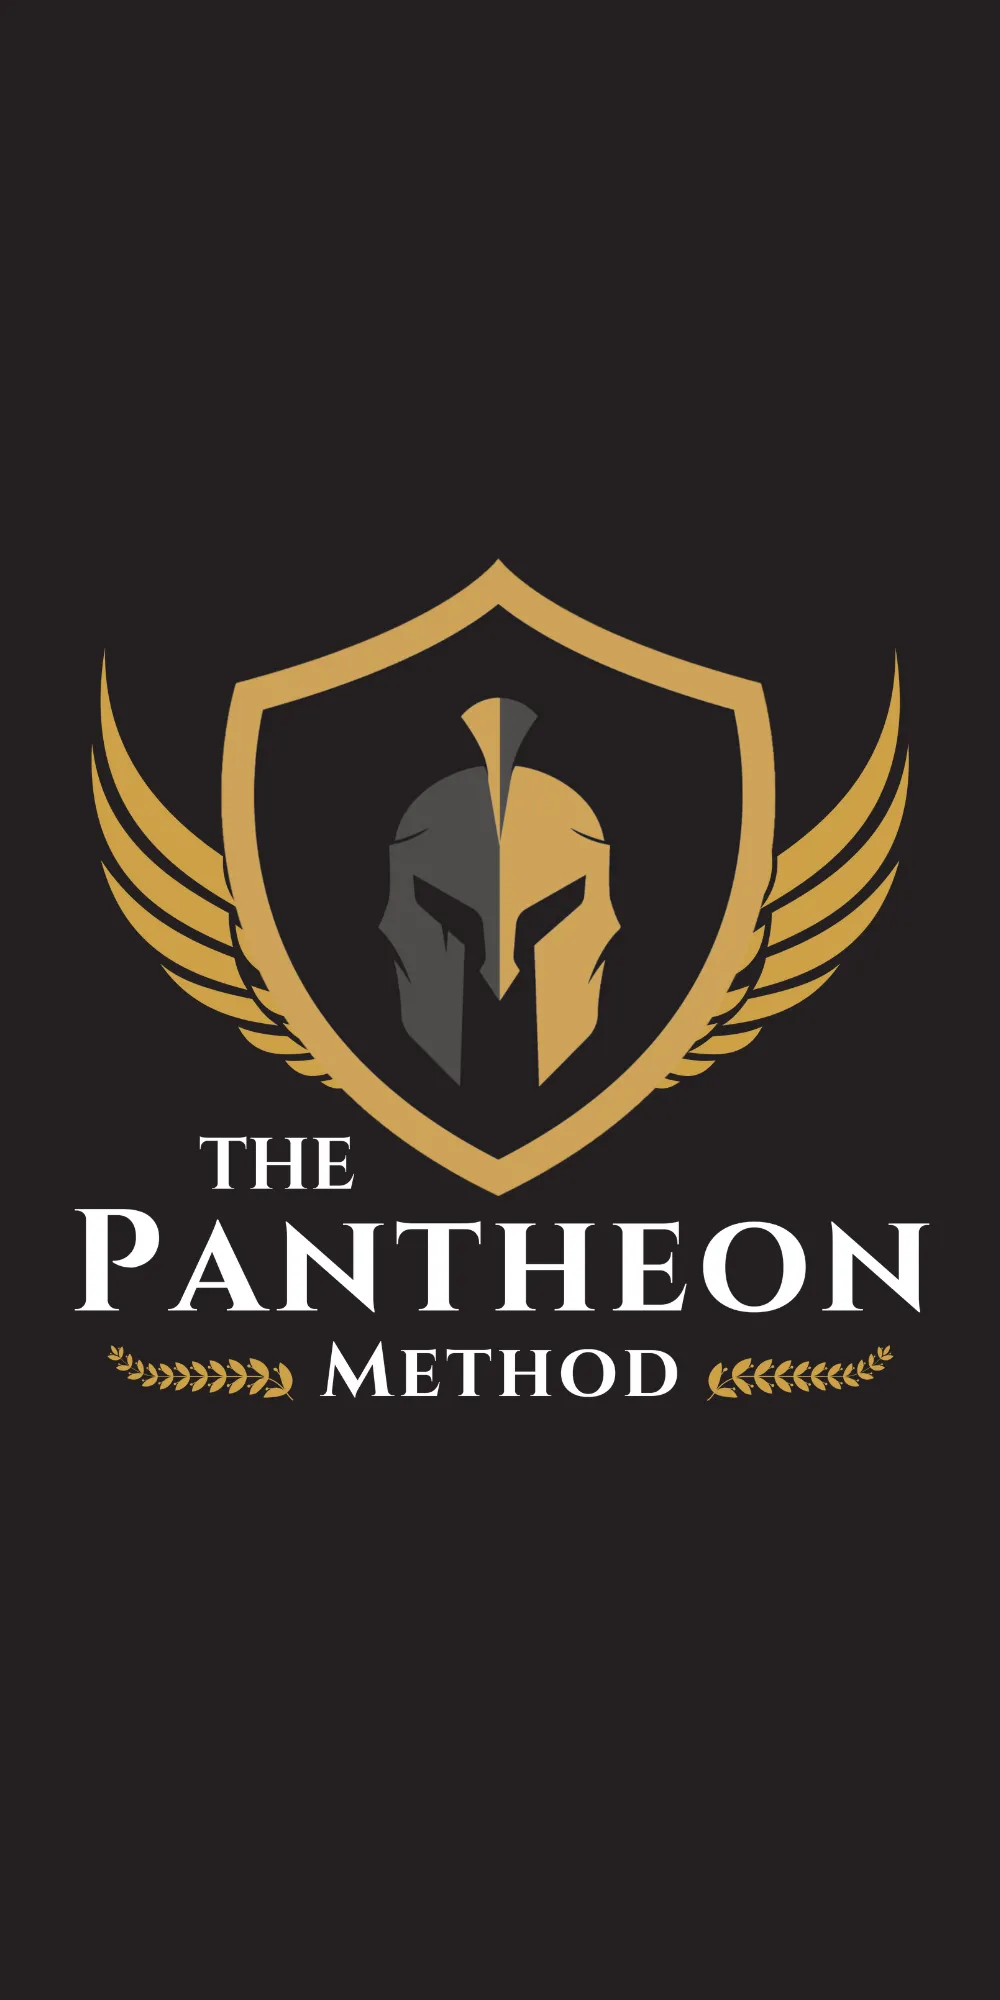 Try Out The Pantheon Method